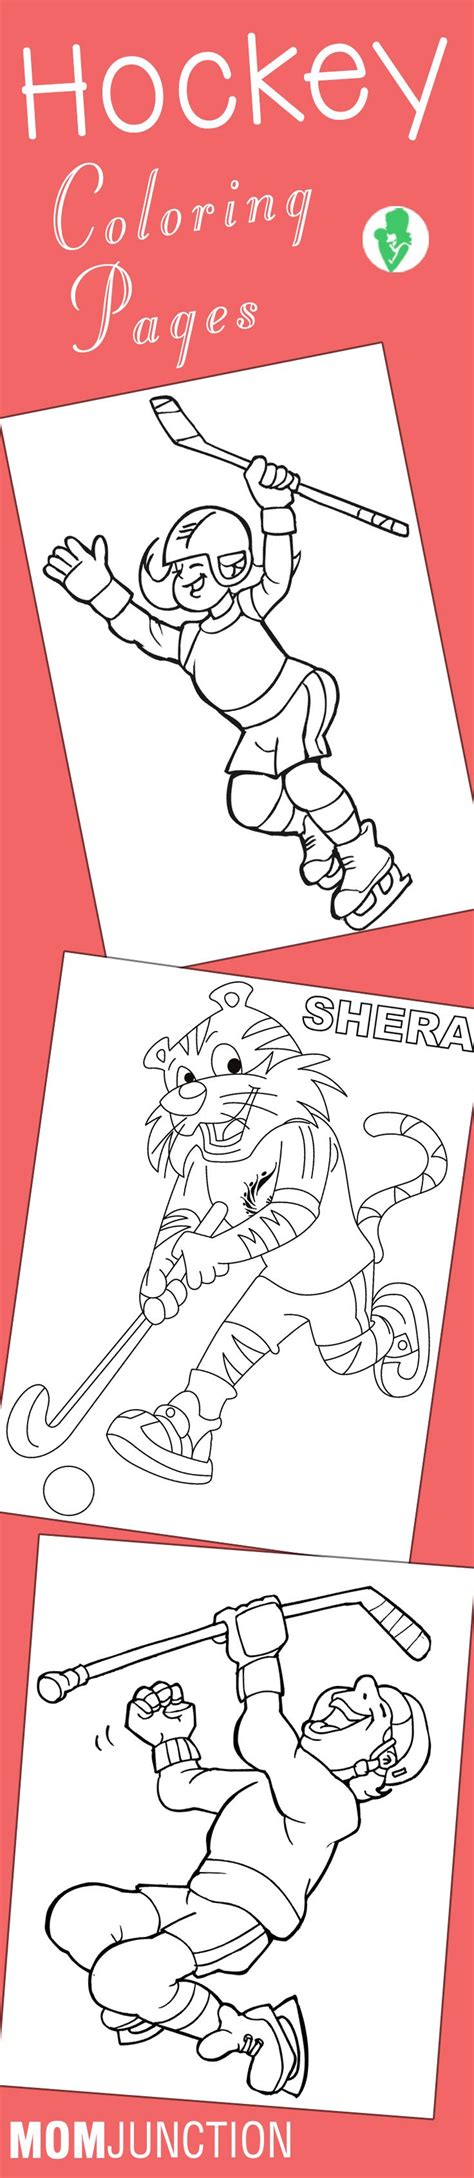 2 click on the coloring page image in the bottom half of the screen to mak. Top 10 Free Printable Hockey Coloring Pages Online ...